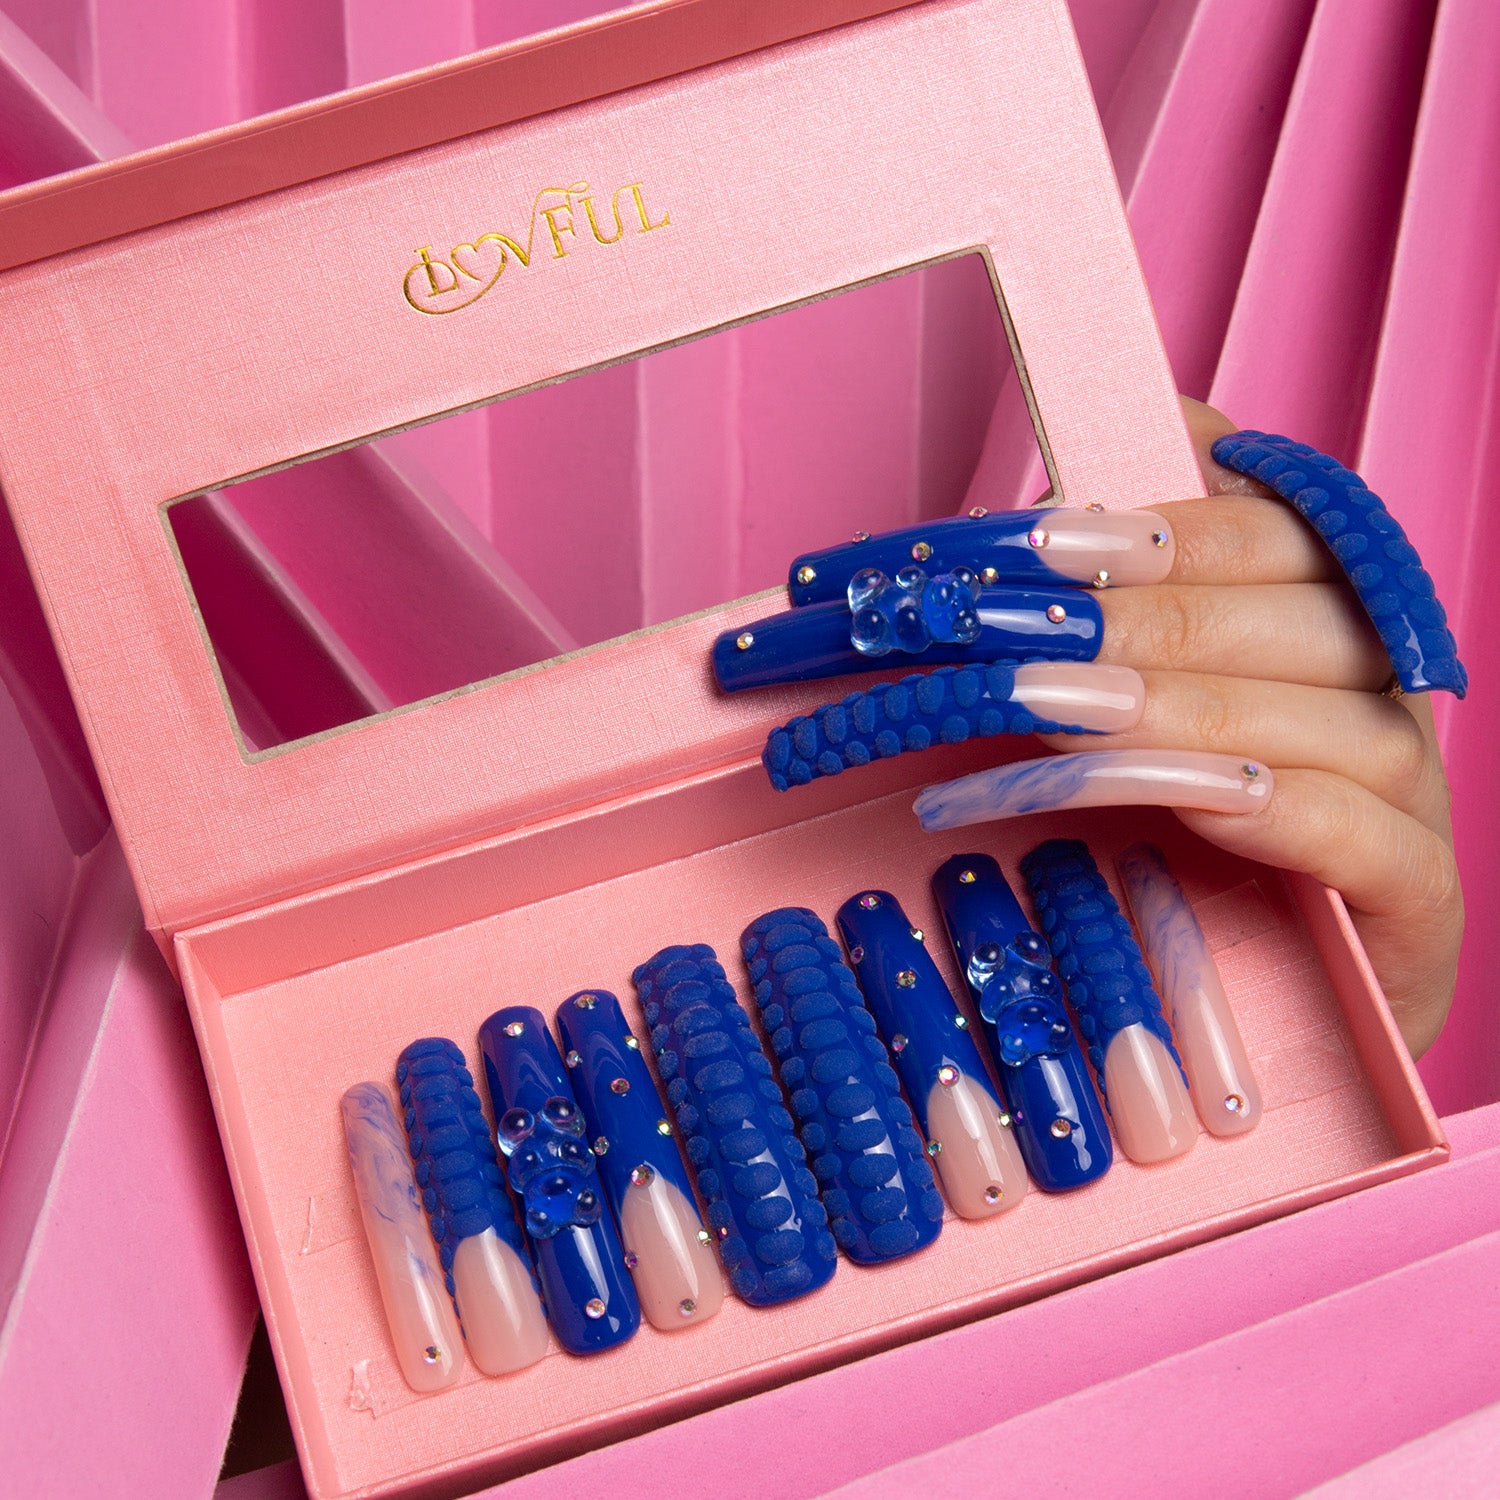 Lovful Little Blue Bear Curve press-on nails with blue French tips, decorated with rhinestones, gummy bears, and 3D dots, displayed in a pink box with a mirror.